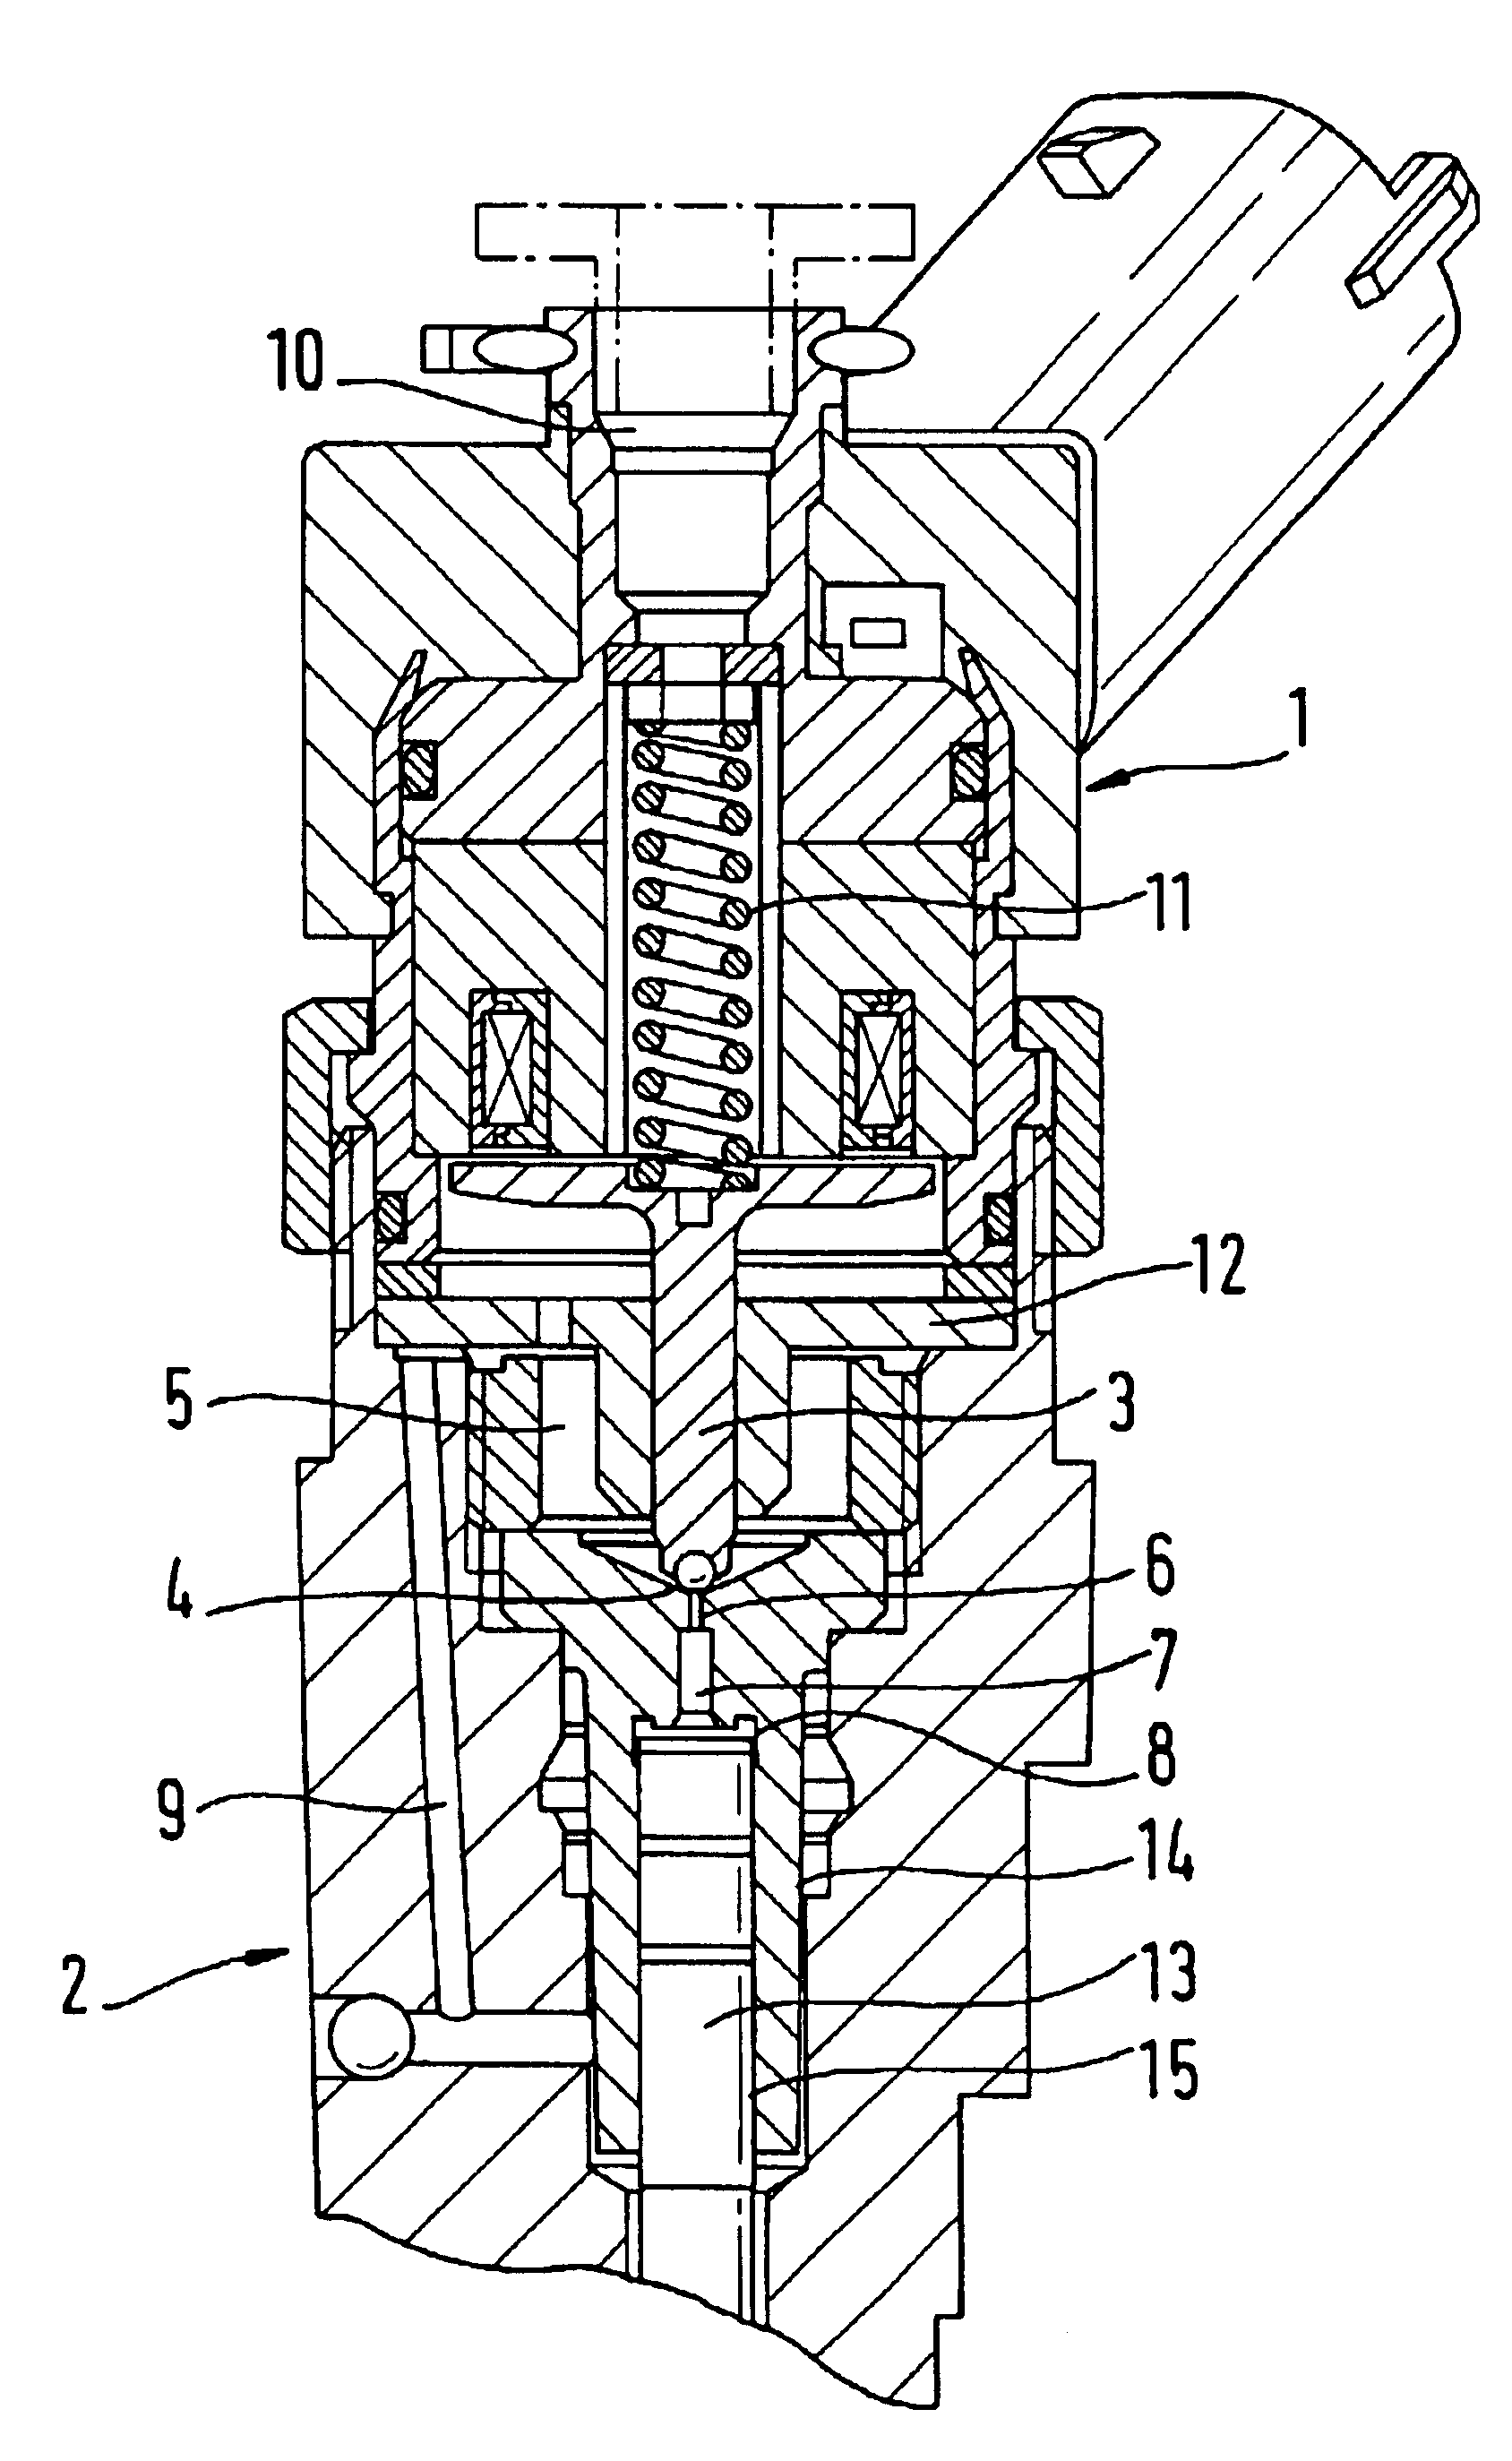 Injector with a magnet valve for controlling an injection valve